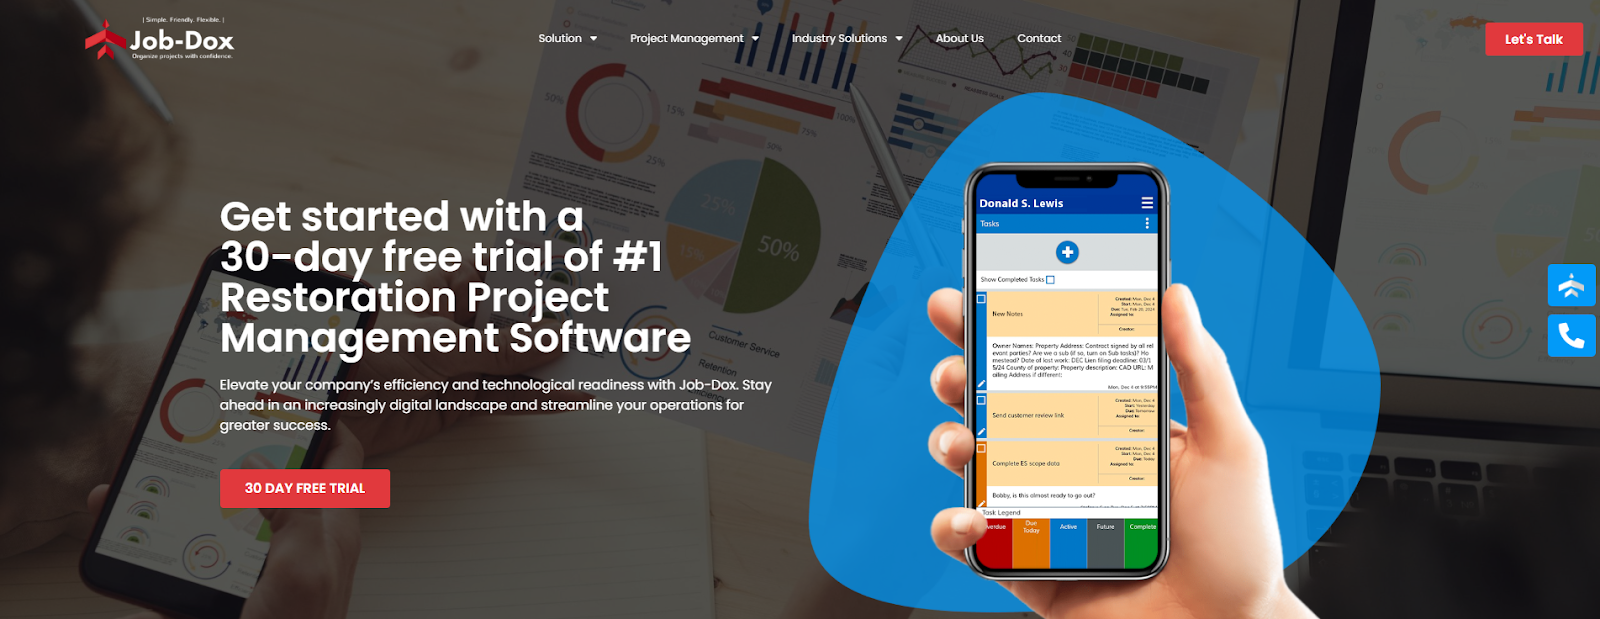 Job-Dox project management painting contractor software